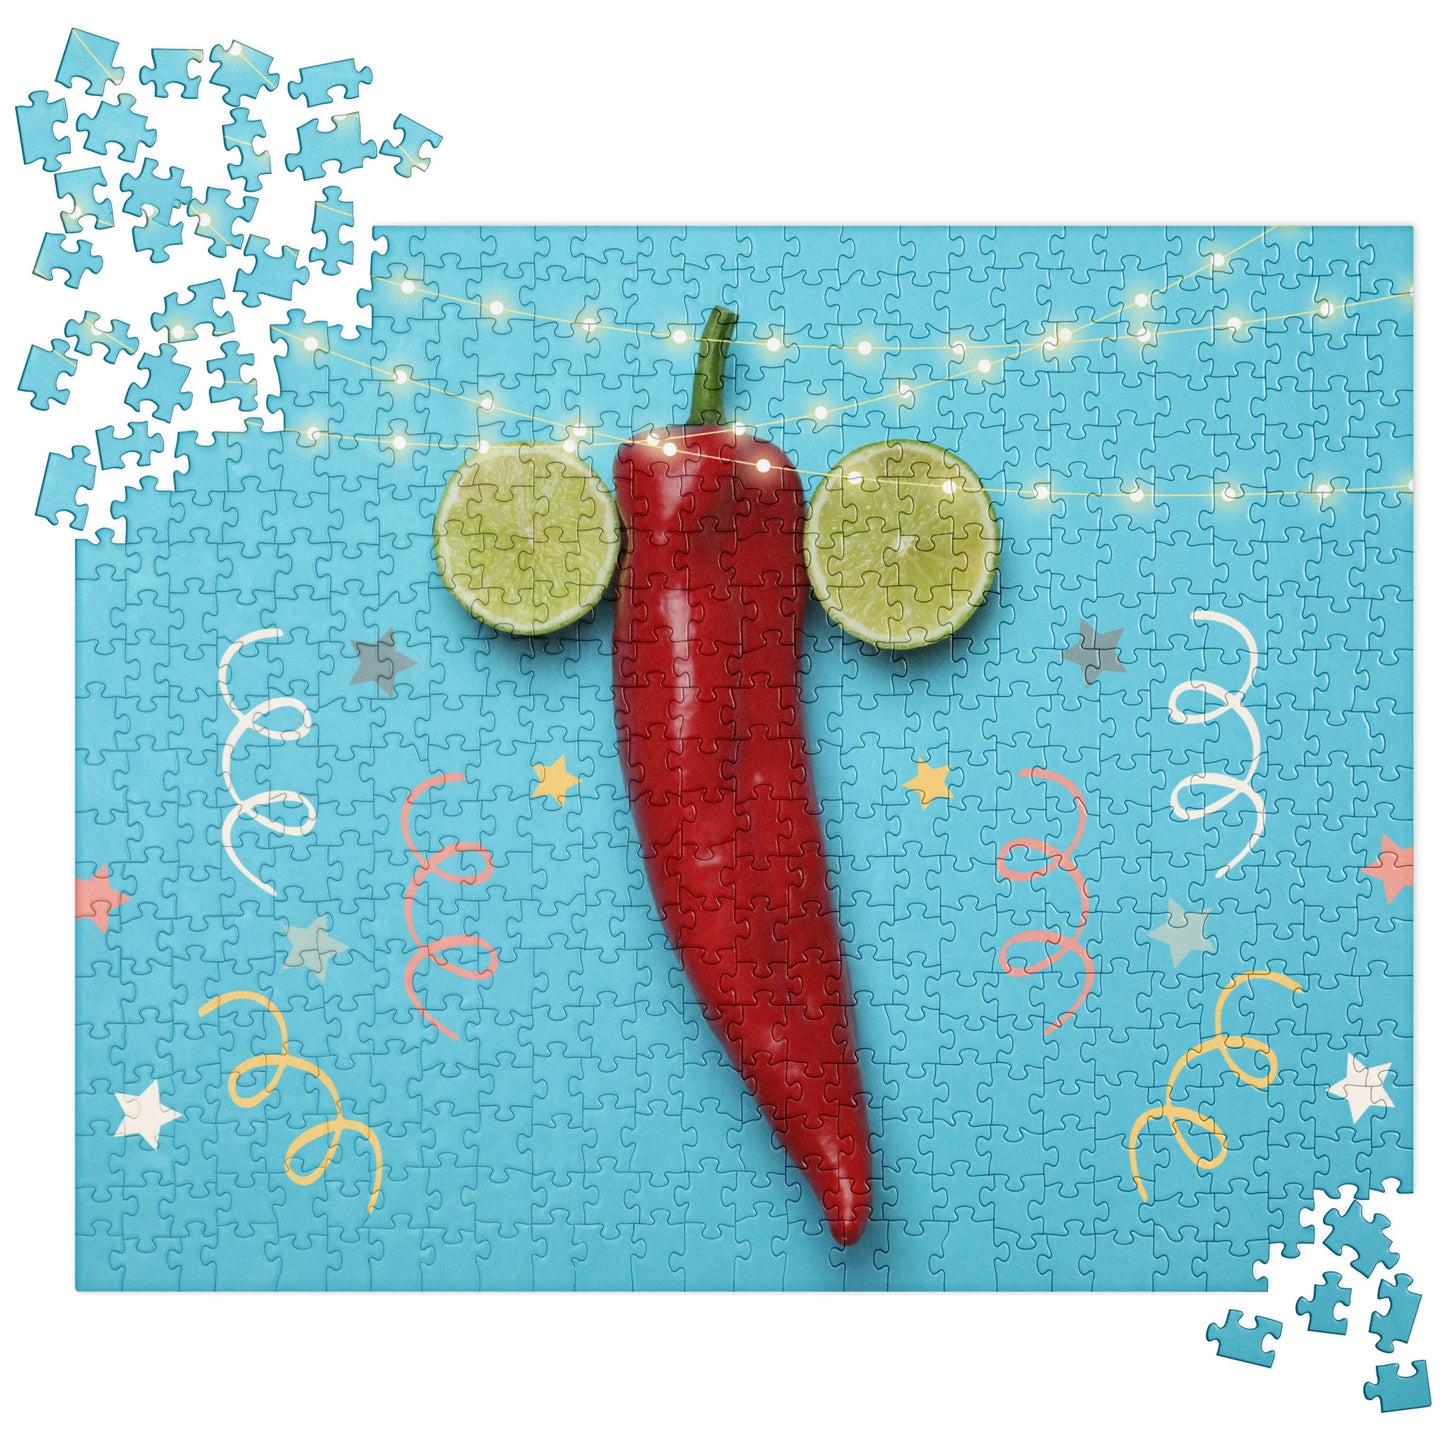 Sensual Jigsaw Puzzle: Chili Pepper and Limes